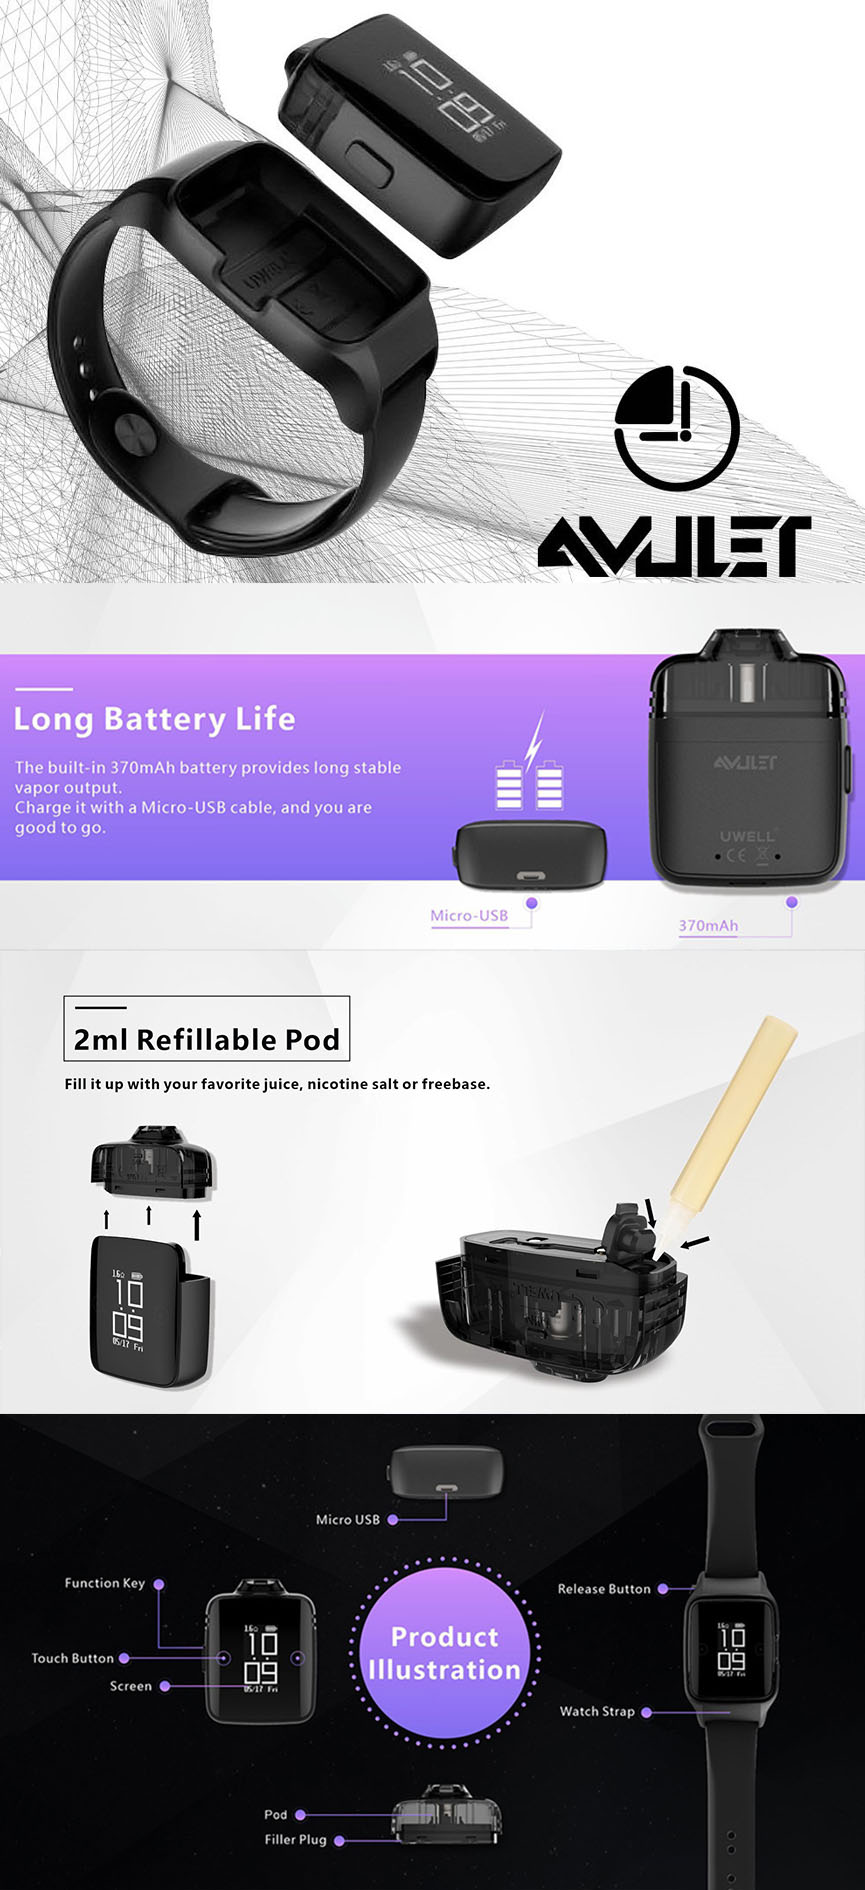 Buy Uwell Amulet Pod and enjoy vaping! Find the latest electronic cigarettes from SMOK, VooPoo, Aspire and Joyetech at vape shop!